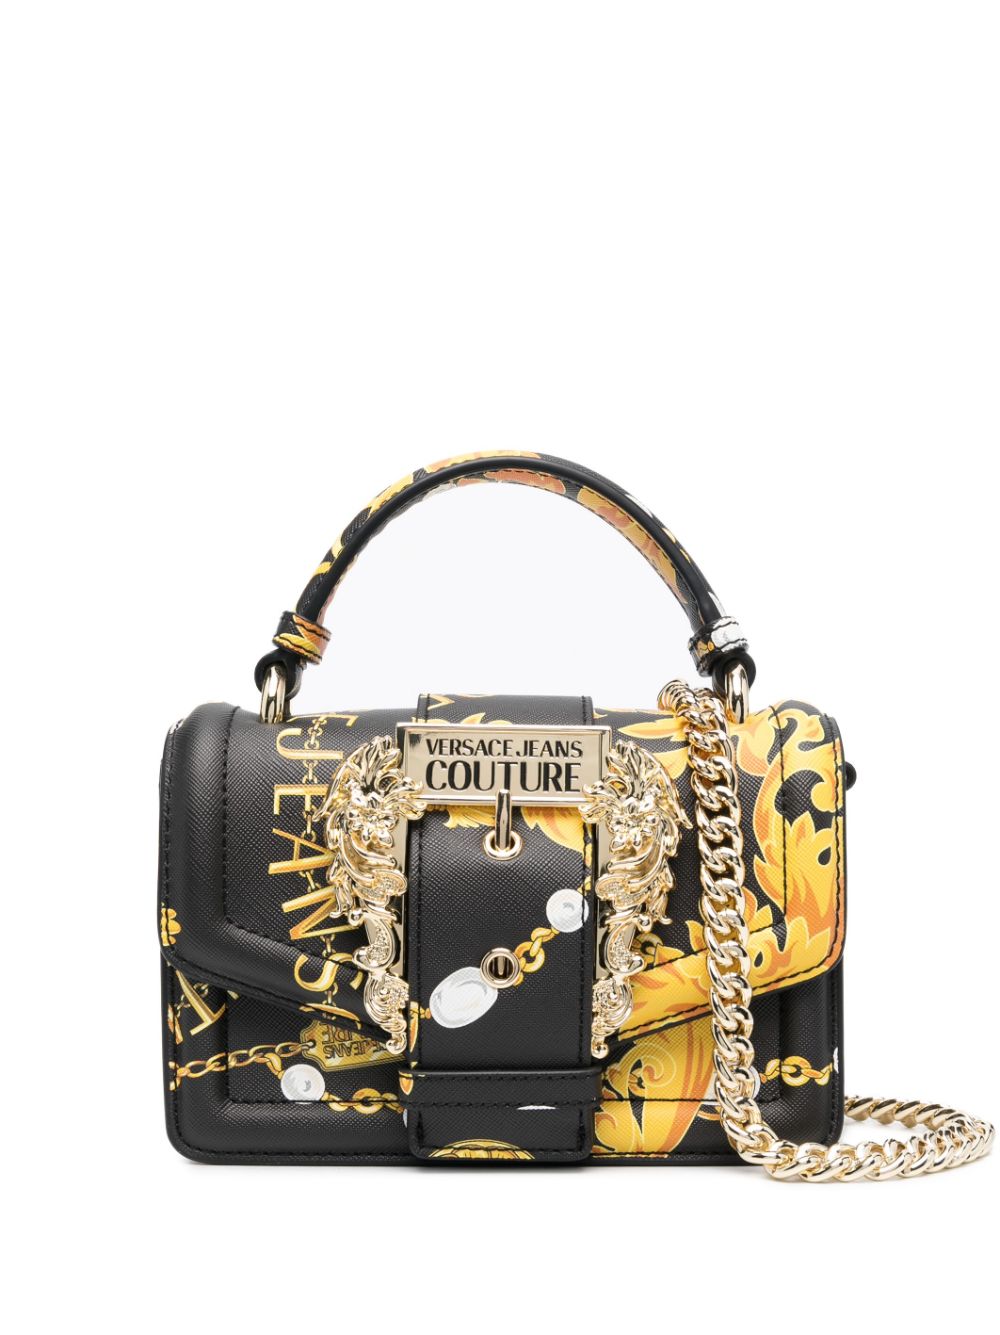 Versace Jeans Couture Barocco-print faux-leather tote bag - Black von Versace Jeans Couture